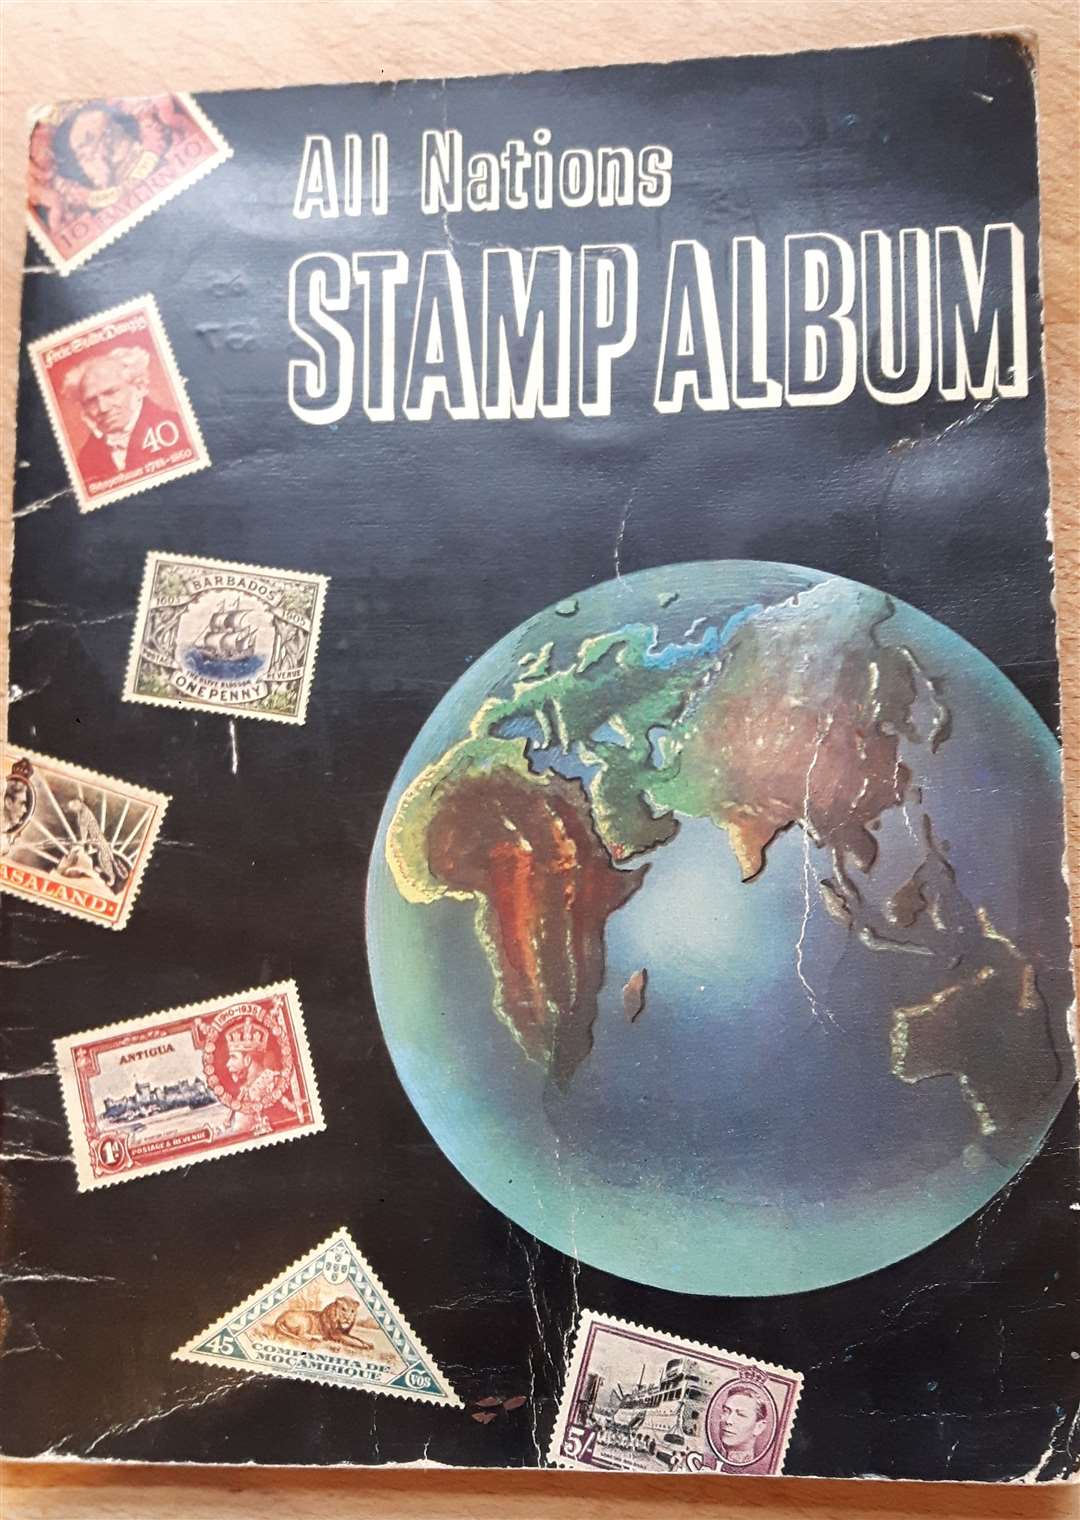 The All Nations Stamp Book